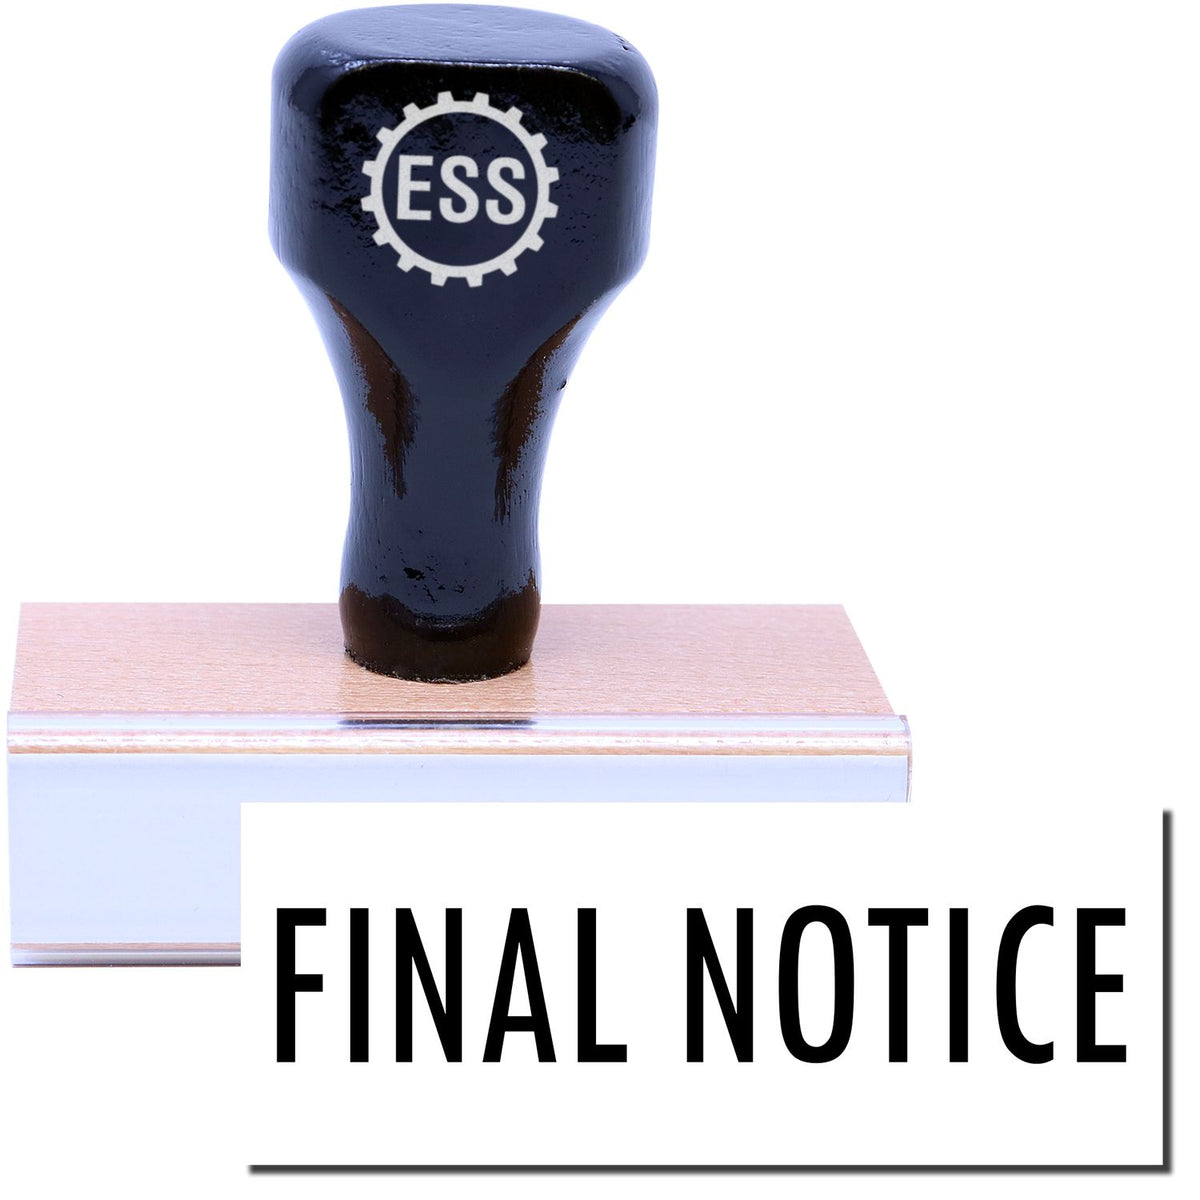 A stock office rubber stamp with a stamped image showing how the text &quot;FINAL NOTICE&quot; in a large font is displayed after stamping.